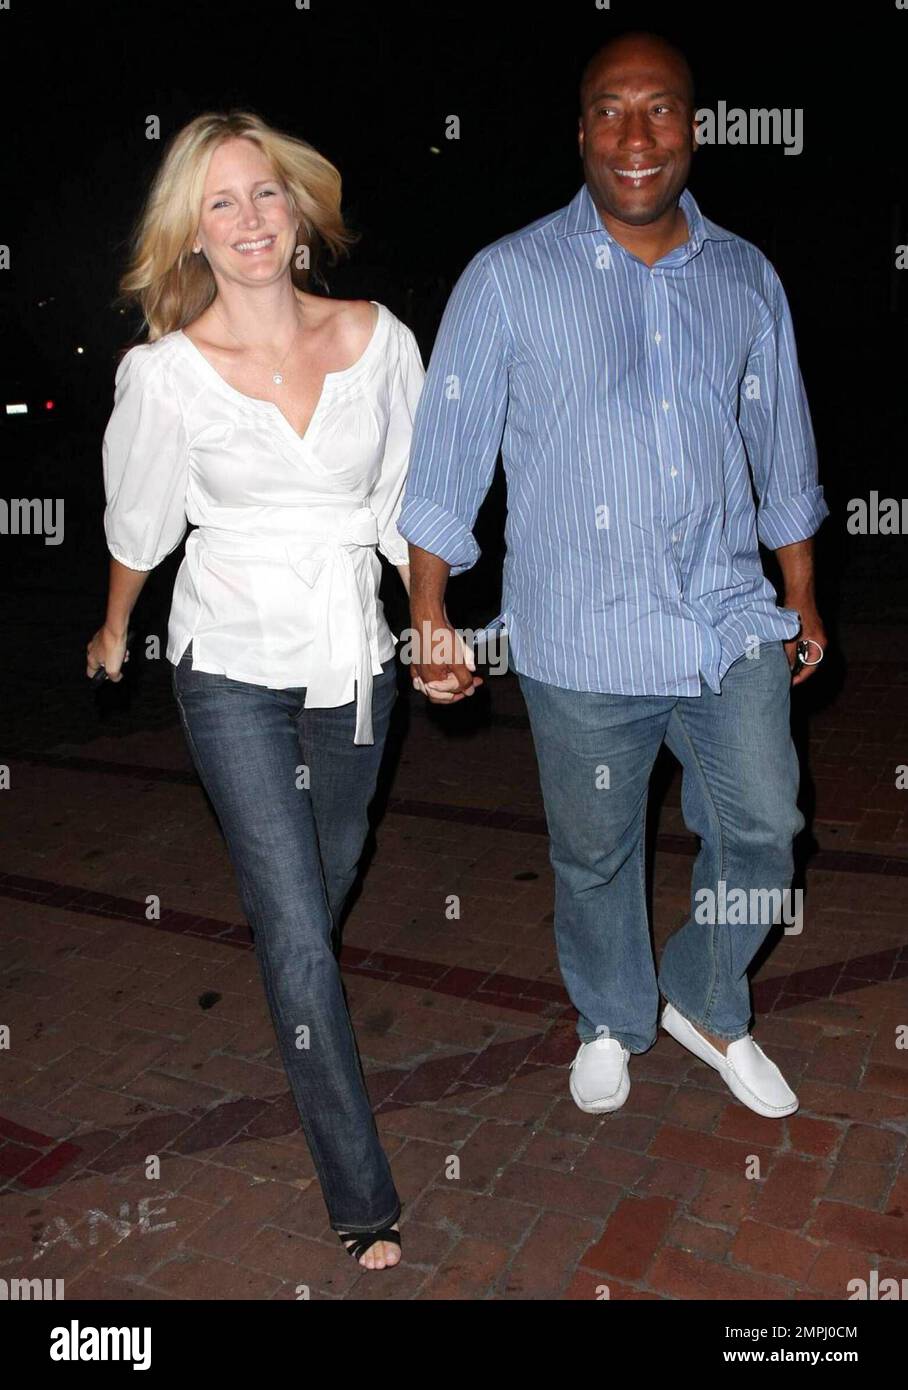 Comedian and talk show host Byron Allen enjoys a night out with wife  Jennifer Lucas at the restaurant Nobu in Malibu, CA. 8/15/09 Stock Photo -  Alamy